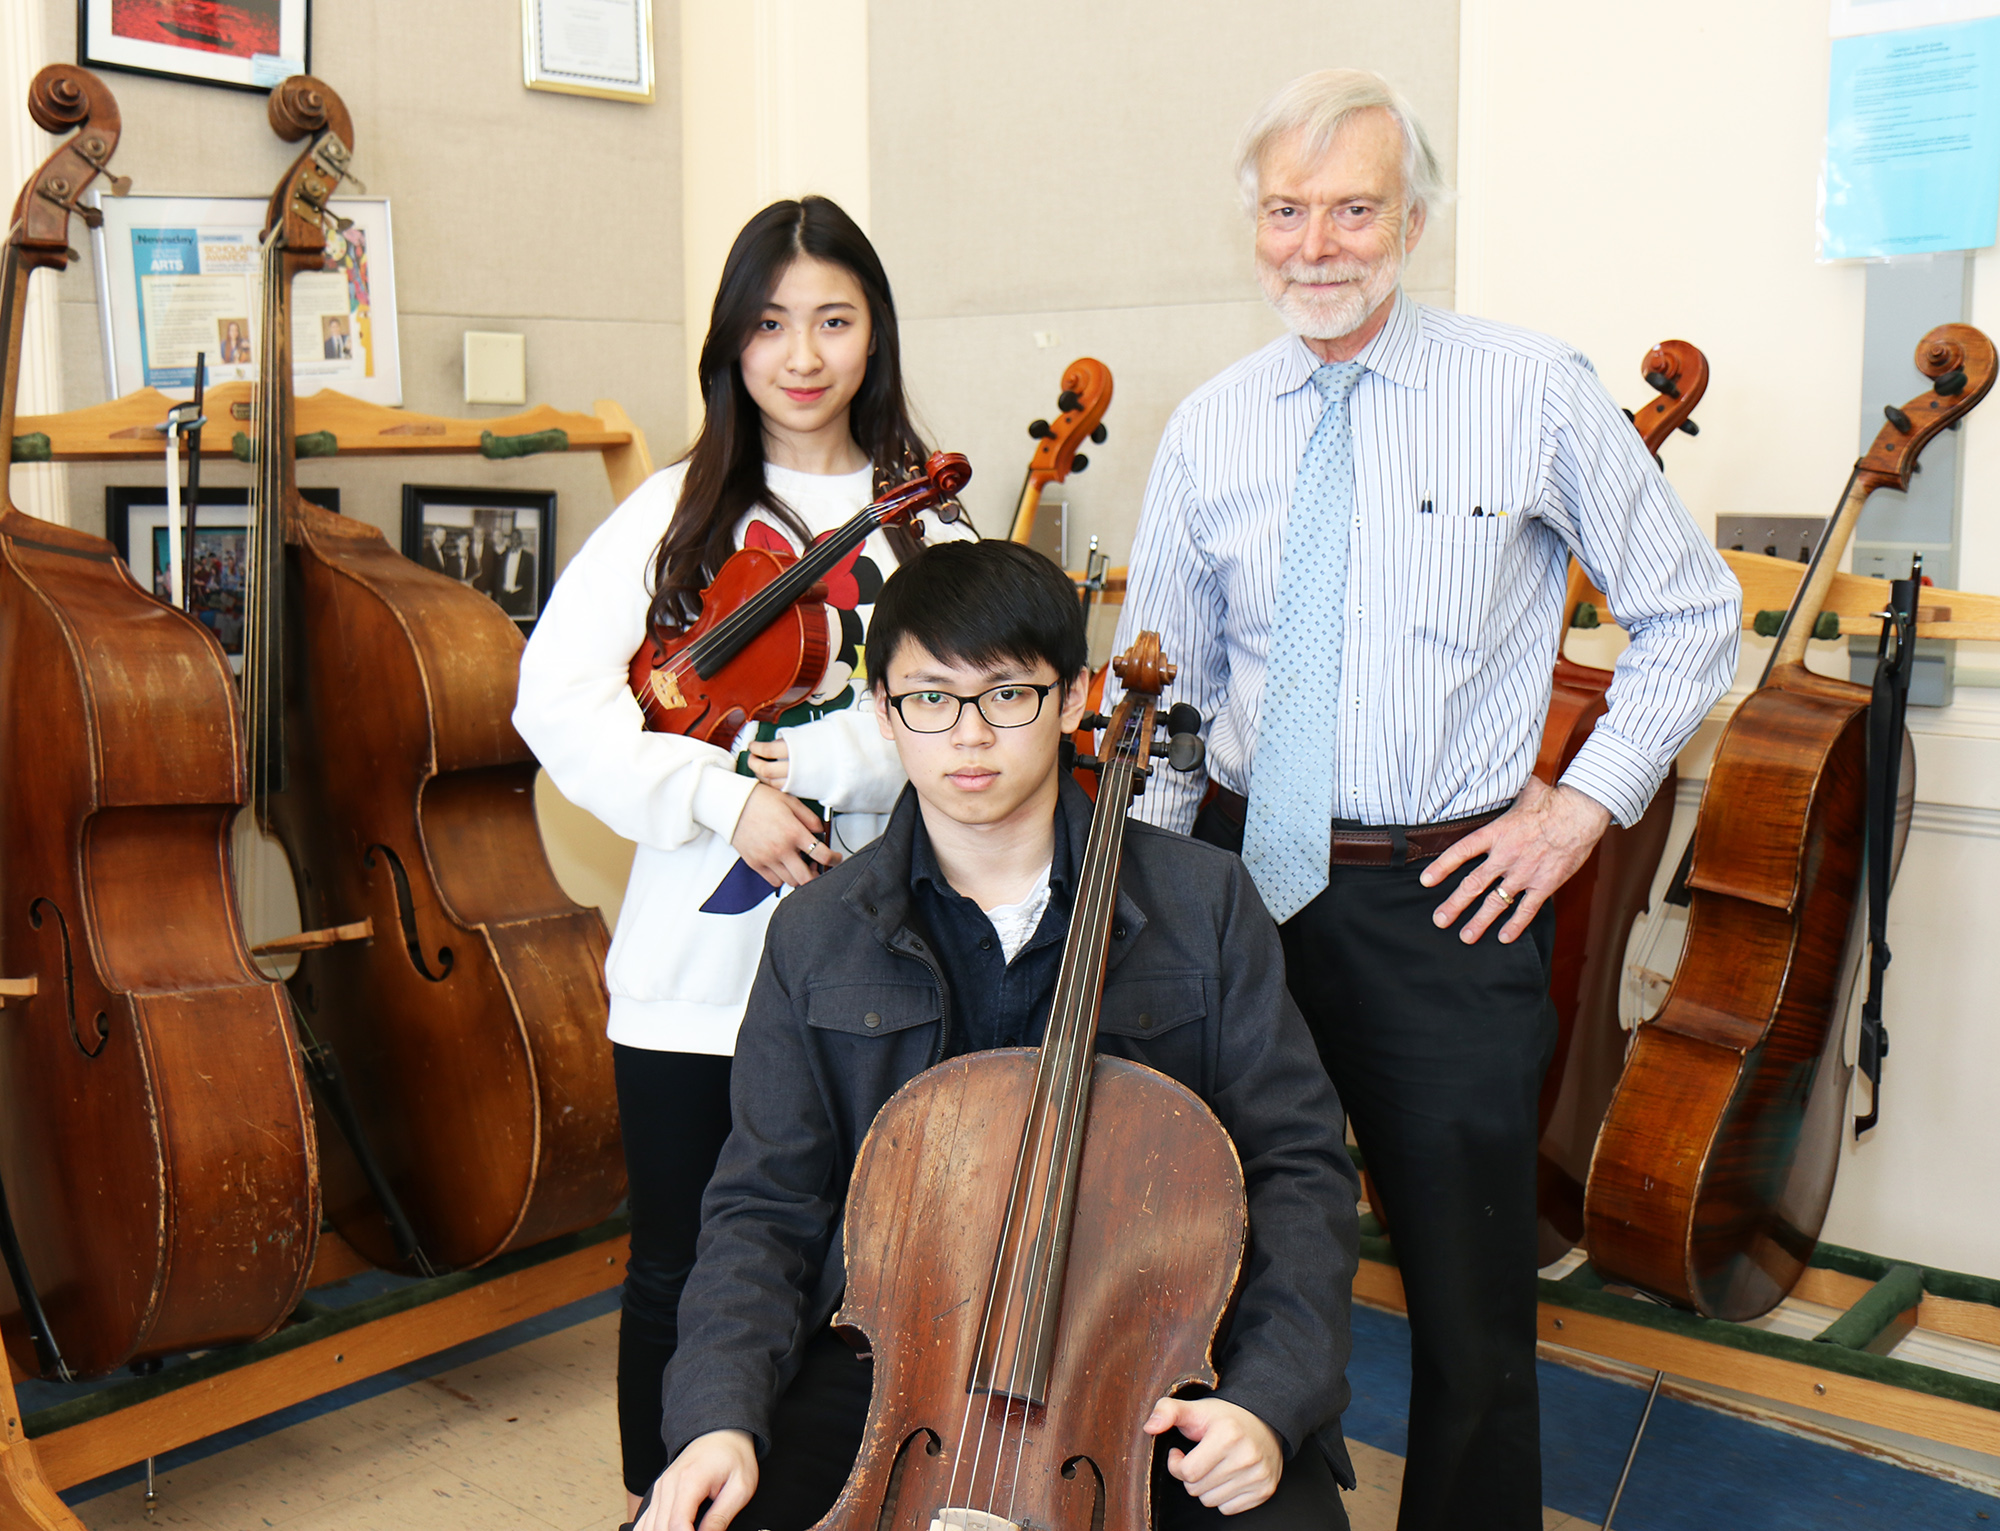 North High violinist Tiantian Emily Wei and cellist Nei-Chuan Neil Chou are among 90 high school musicians from the entire state who have been invited to attend the New York State Summer School for the Arts (NYSSSA) School of Orchestral Studies. (Photo courtesy of the Great Neck Public Schools)